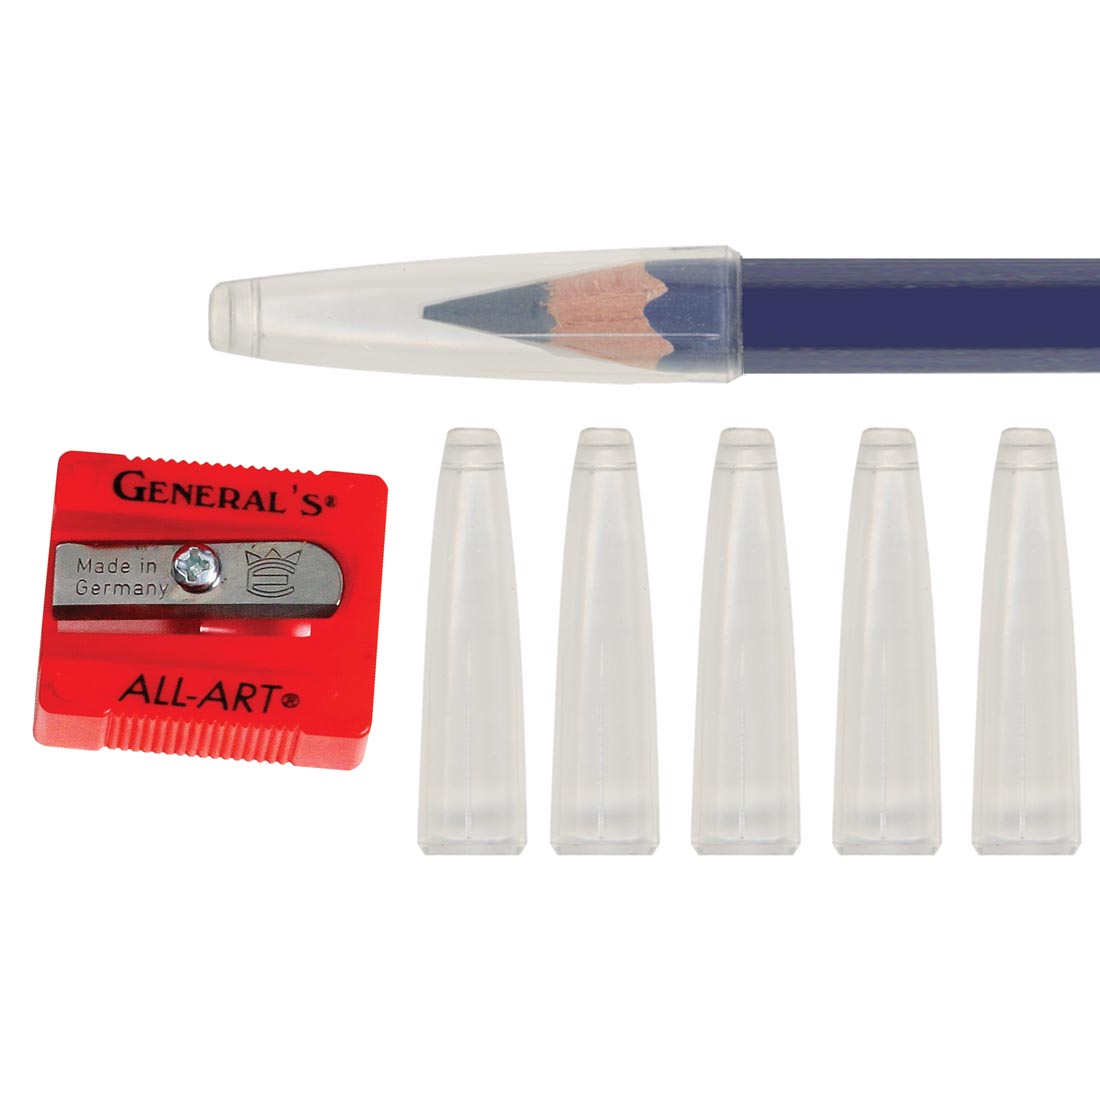 6 General's Sav-a-Point plastic protectors (one shown in use on a pencil) and one Little Red All-Art Sharpener